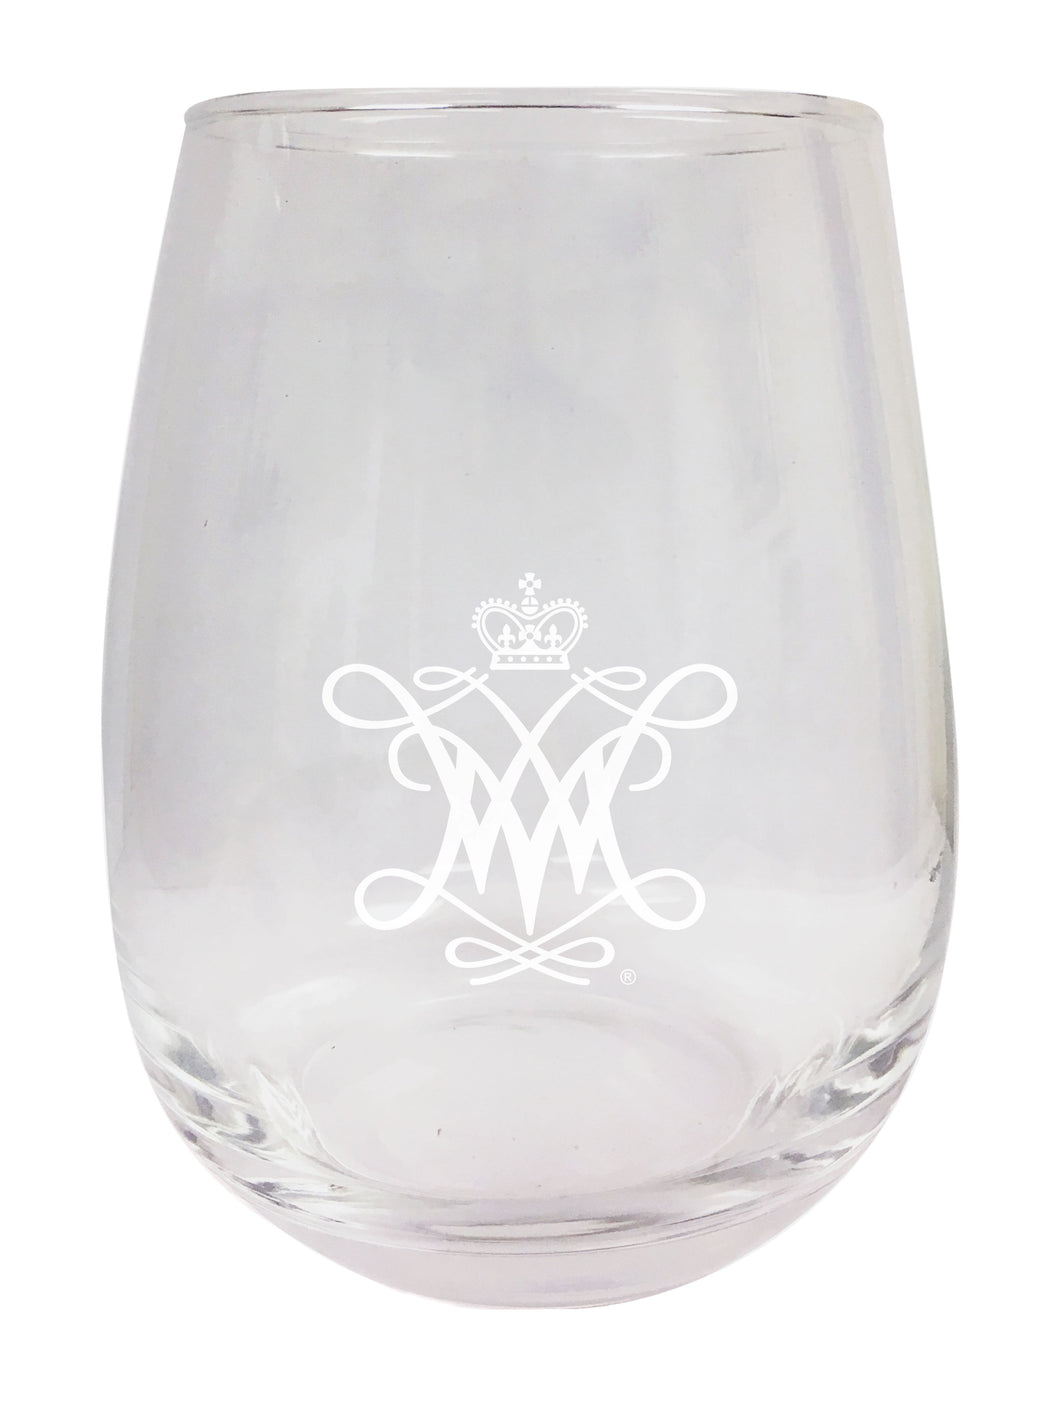 William and Mary NCAA 15 oz Laser-Engraved Stemless Wine Glass - Perfect for Alumni & Fans